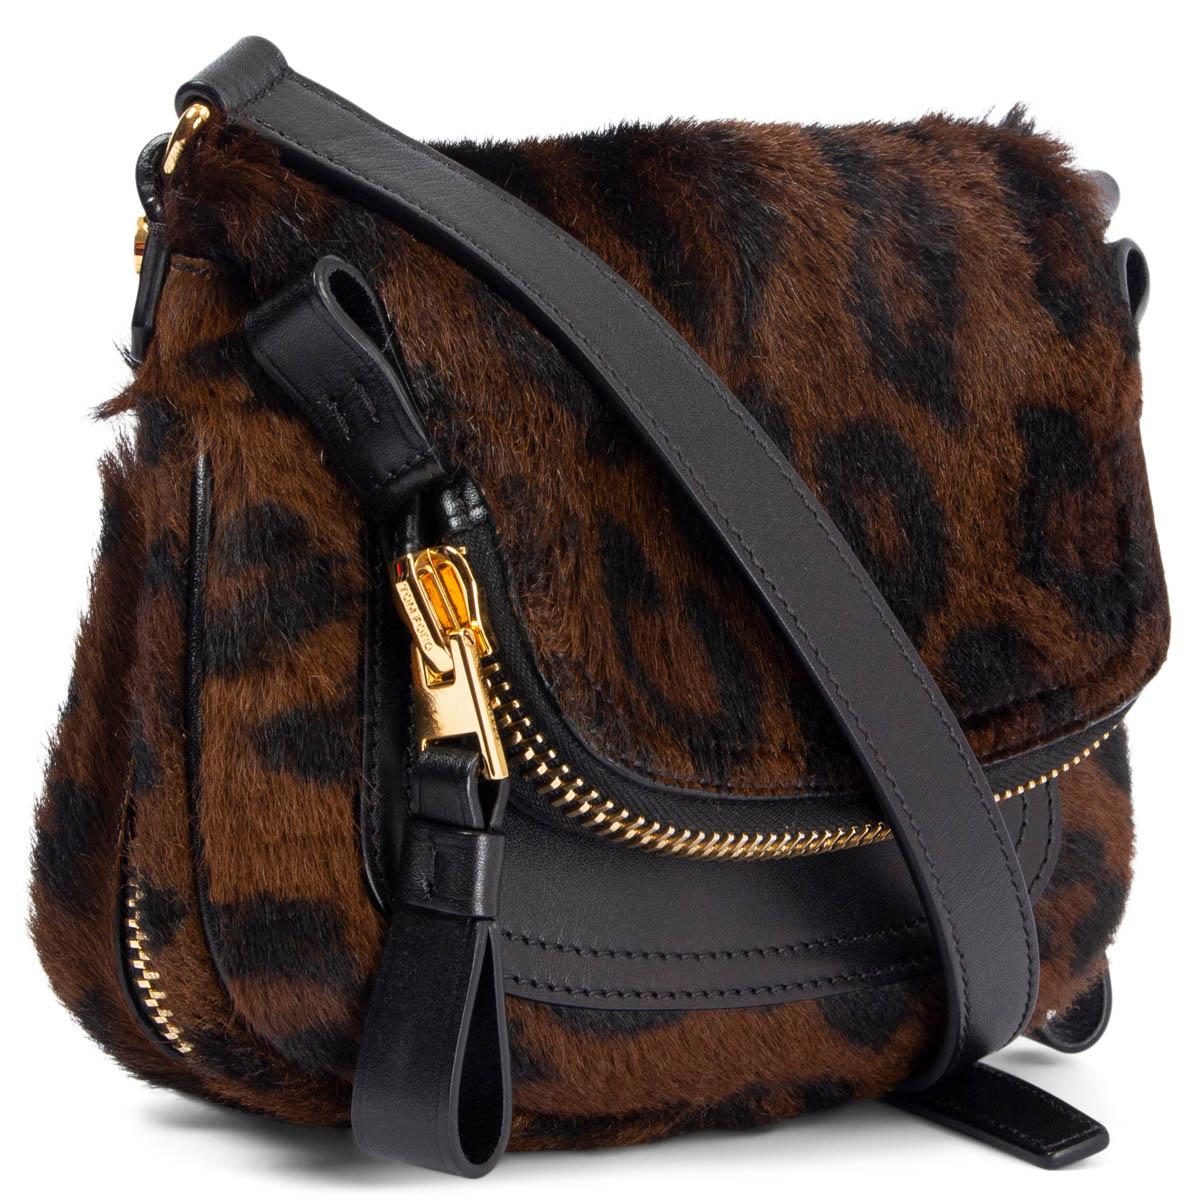 100% authentic Tom Ford Jennifer mini crossbody bag in black and brown printed leopard calf hair and black leather. Adjustable shoulder strap and gold-tone hardware. Expandable zipper gusset on the bottom. Zipper pocket flap with open pocket on the